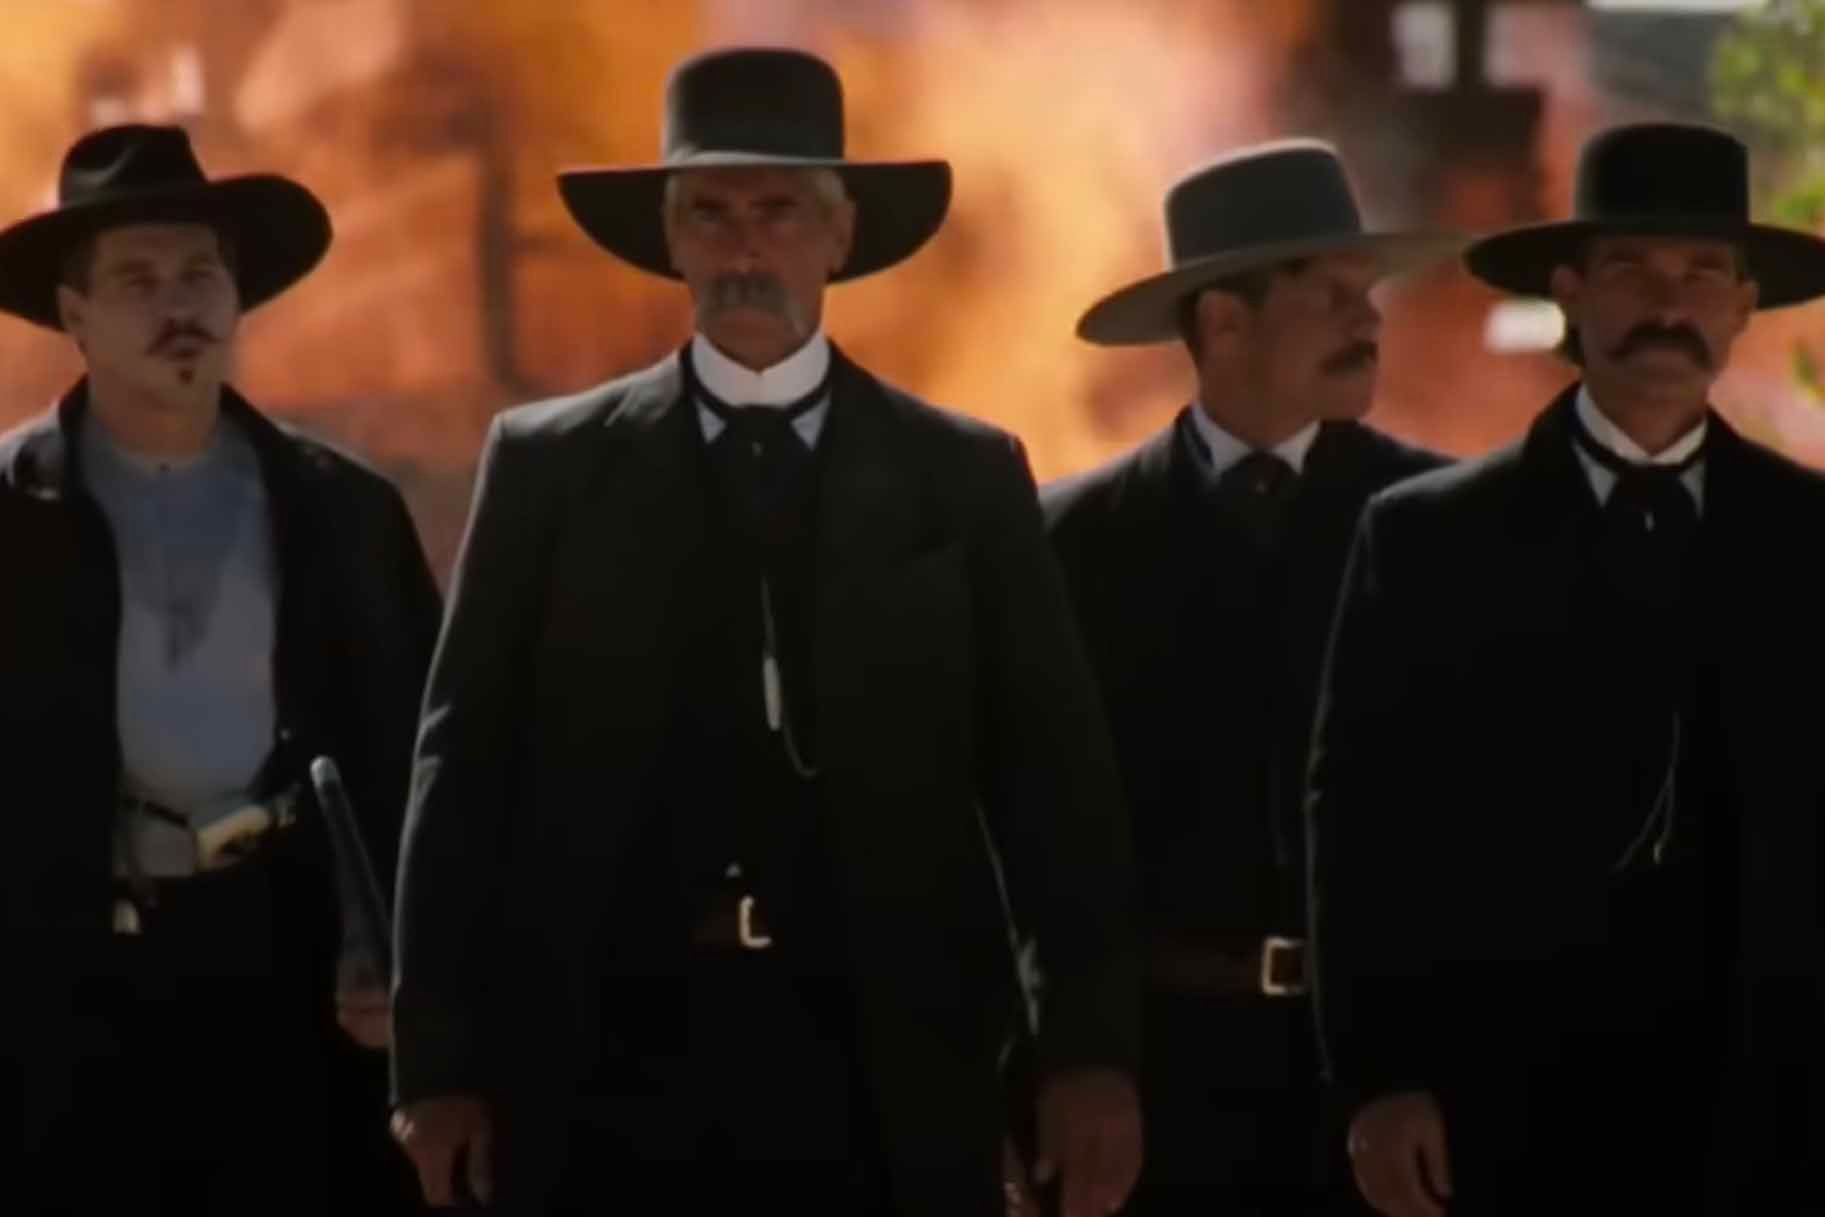 Doc Holliday and the Earp brothers walk together in Tombstone (1993).